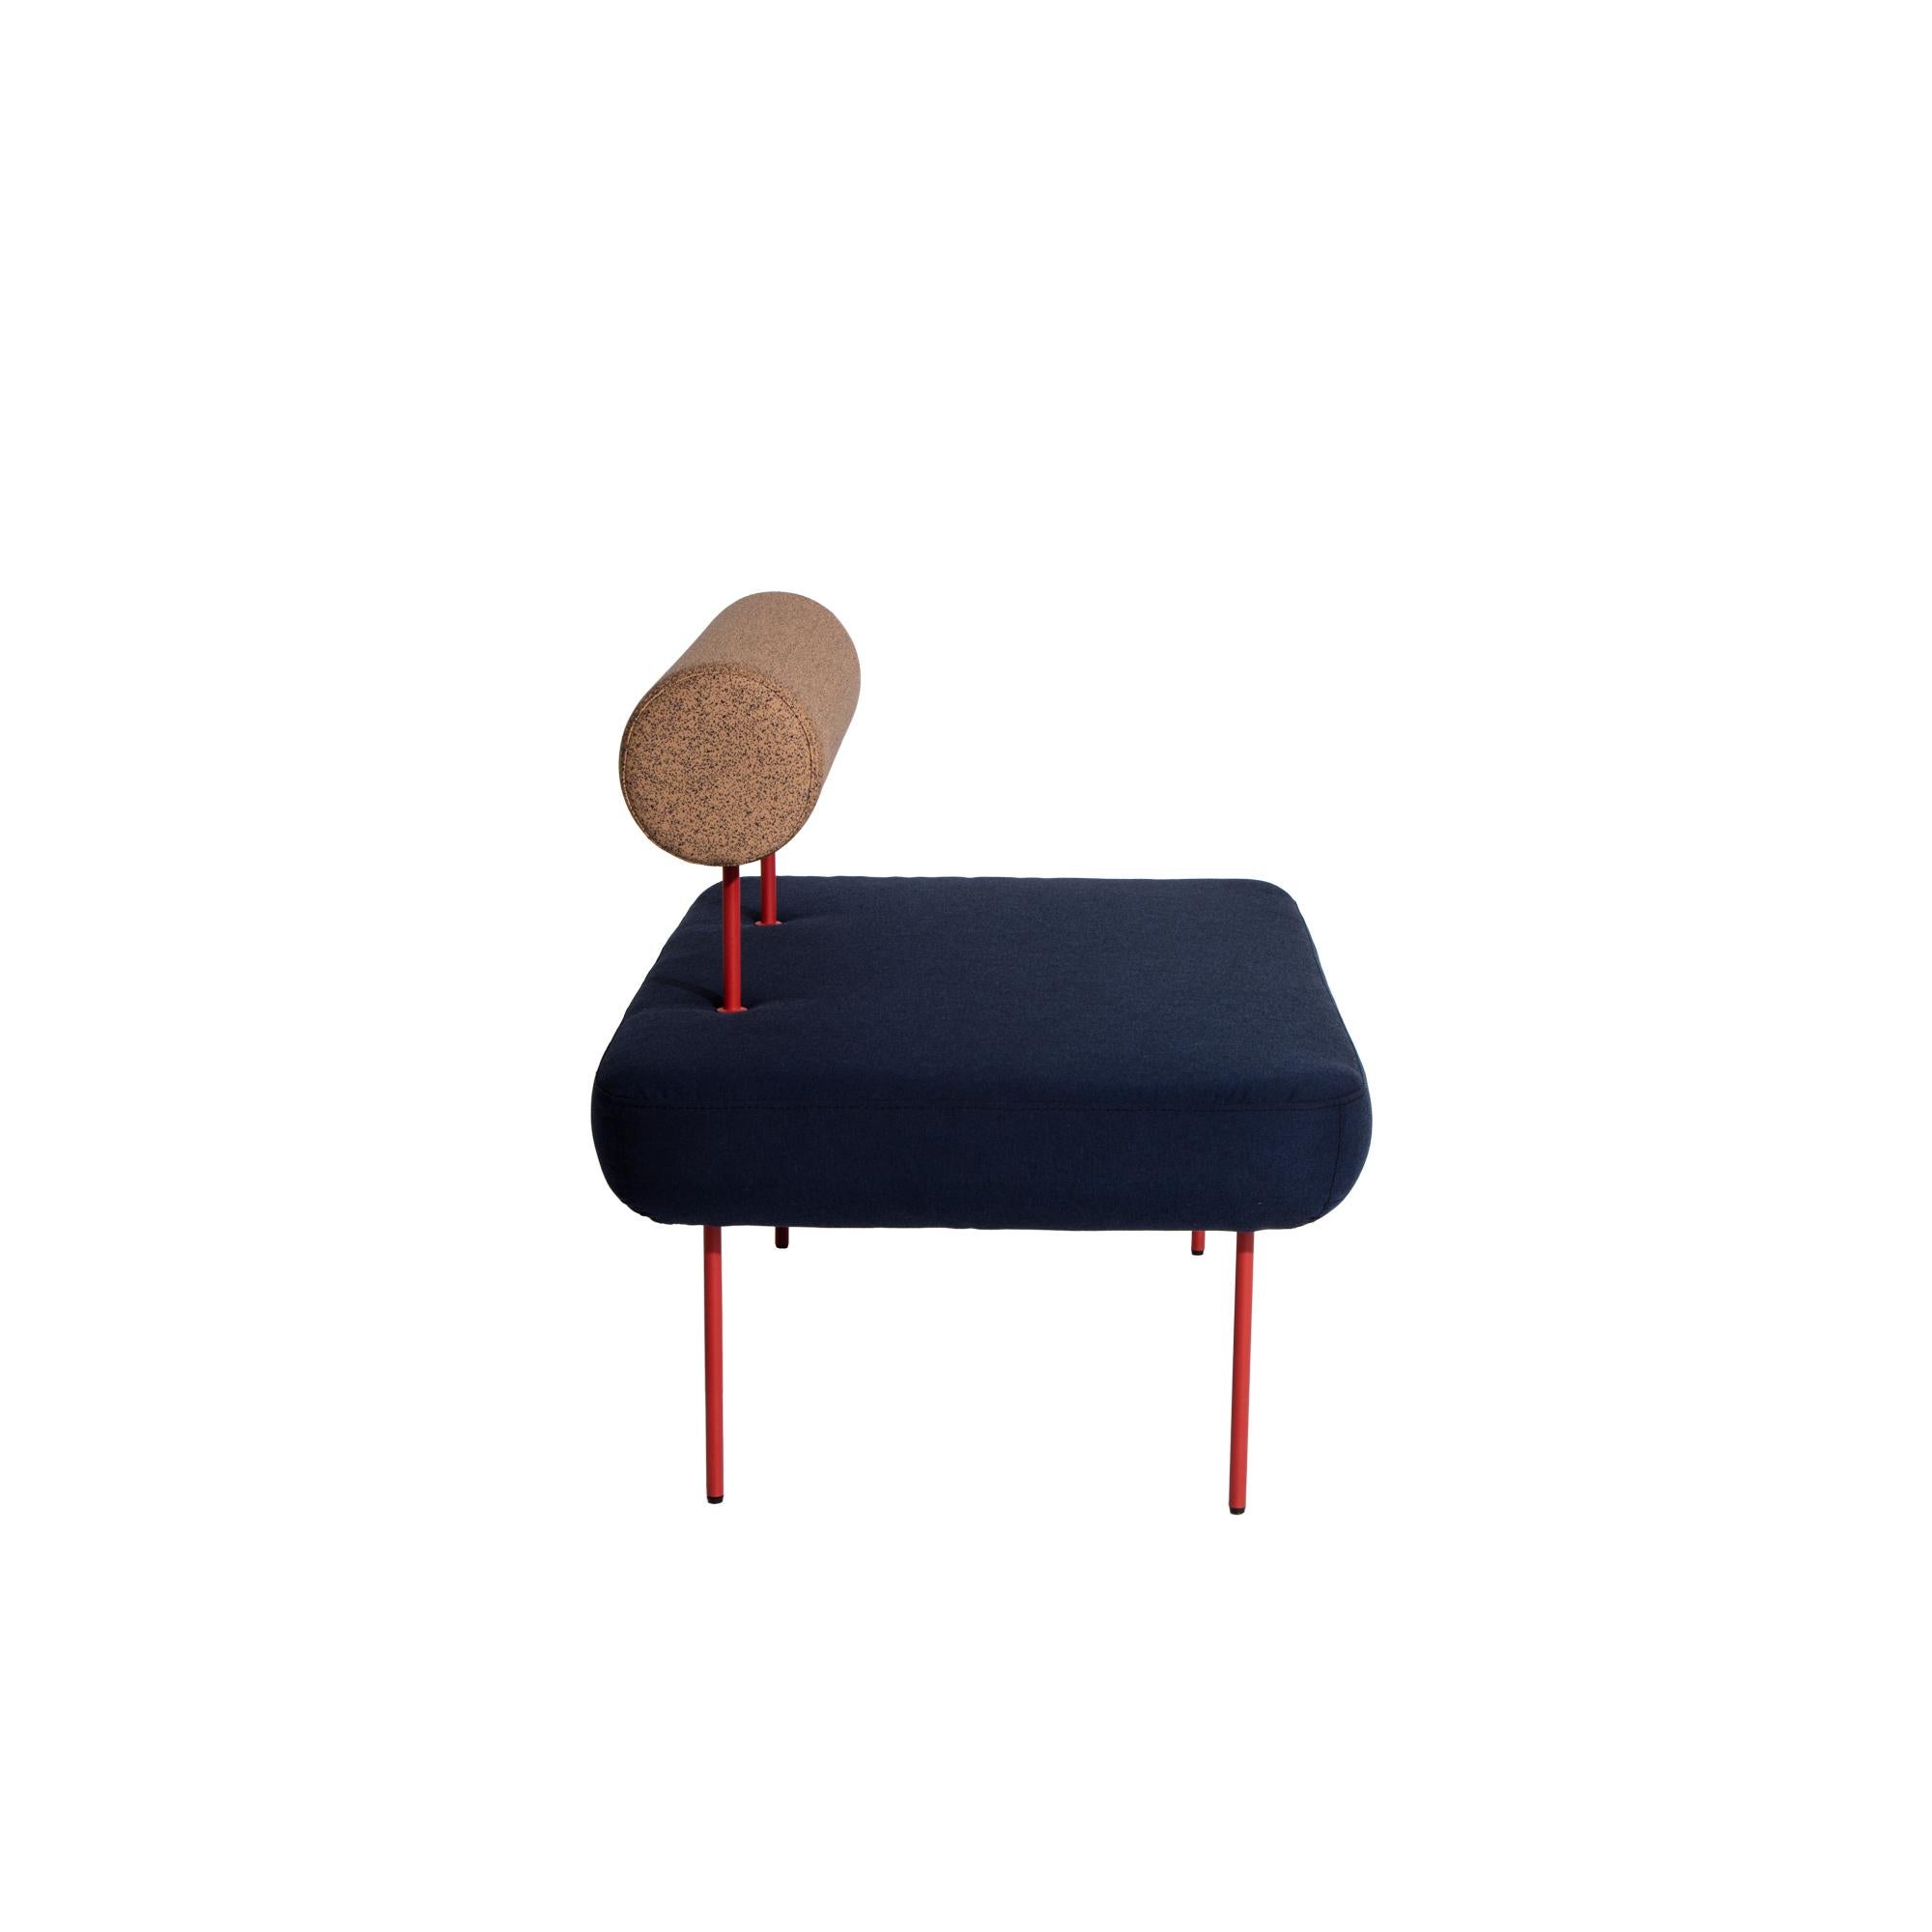 European Petite Friture Large Hoff Armchair in Blue and Brown by Morten & Jonas, 2015 For Sale